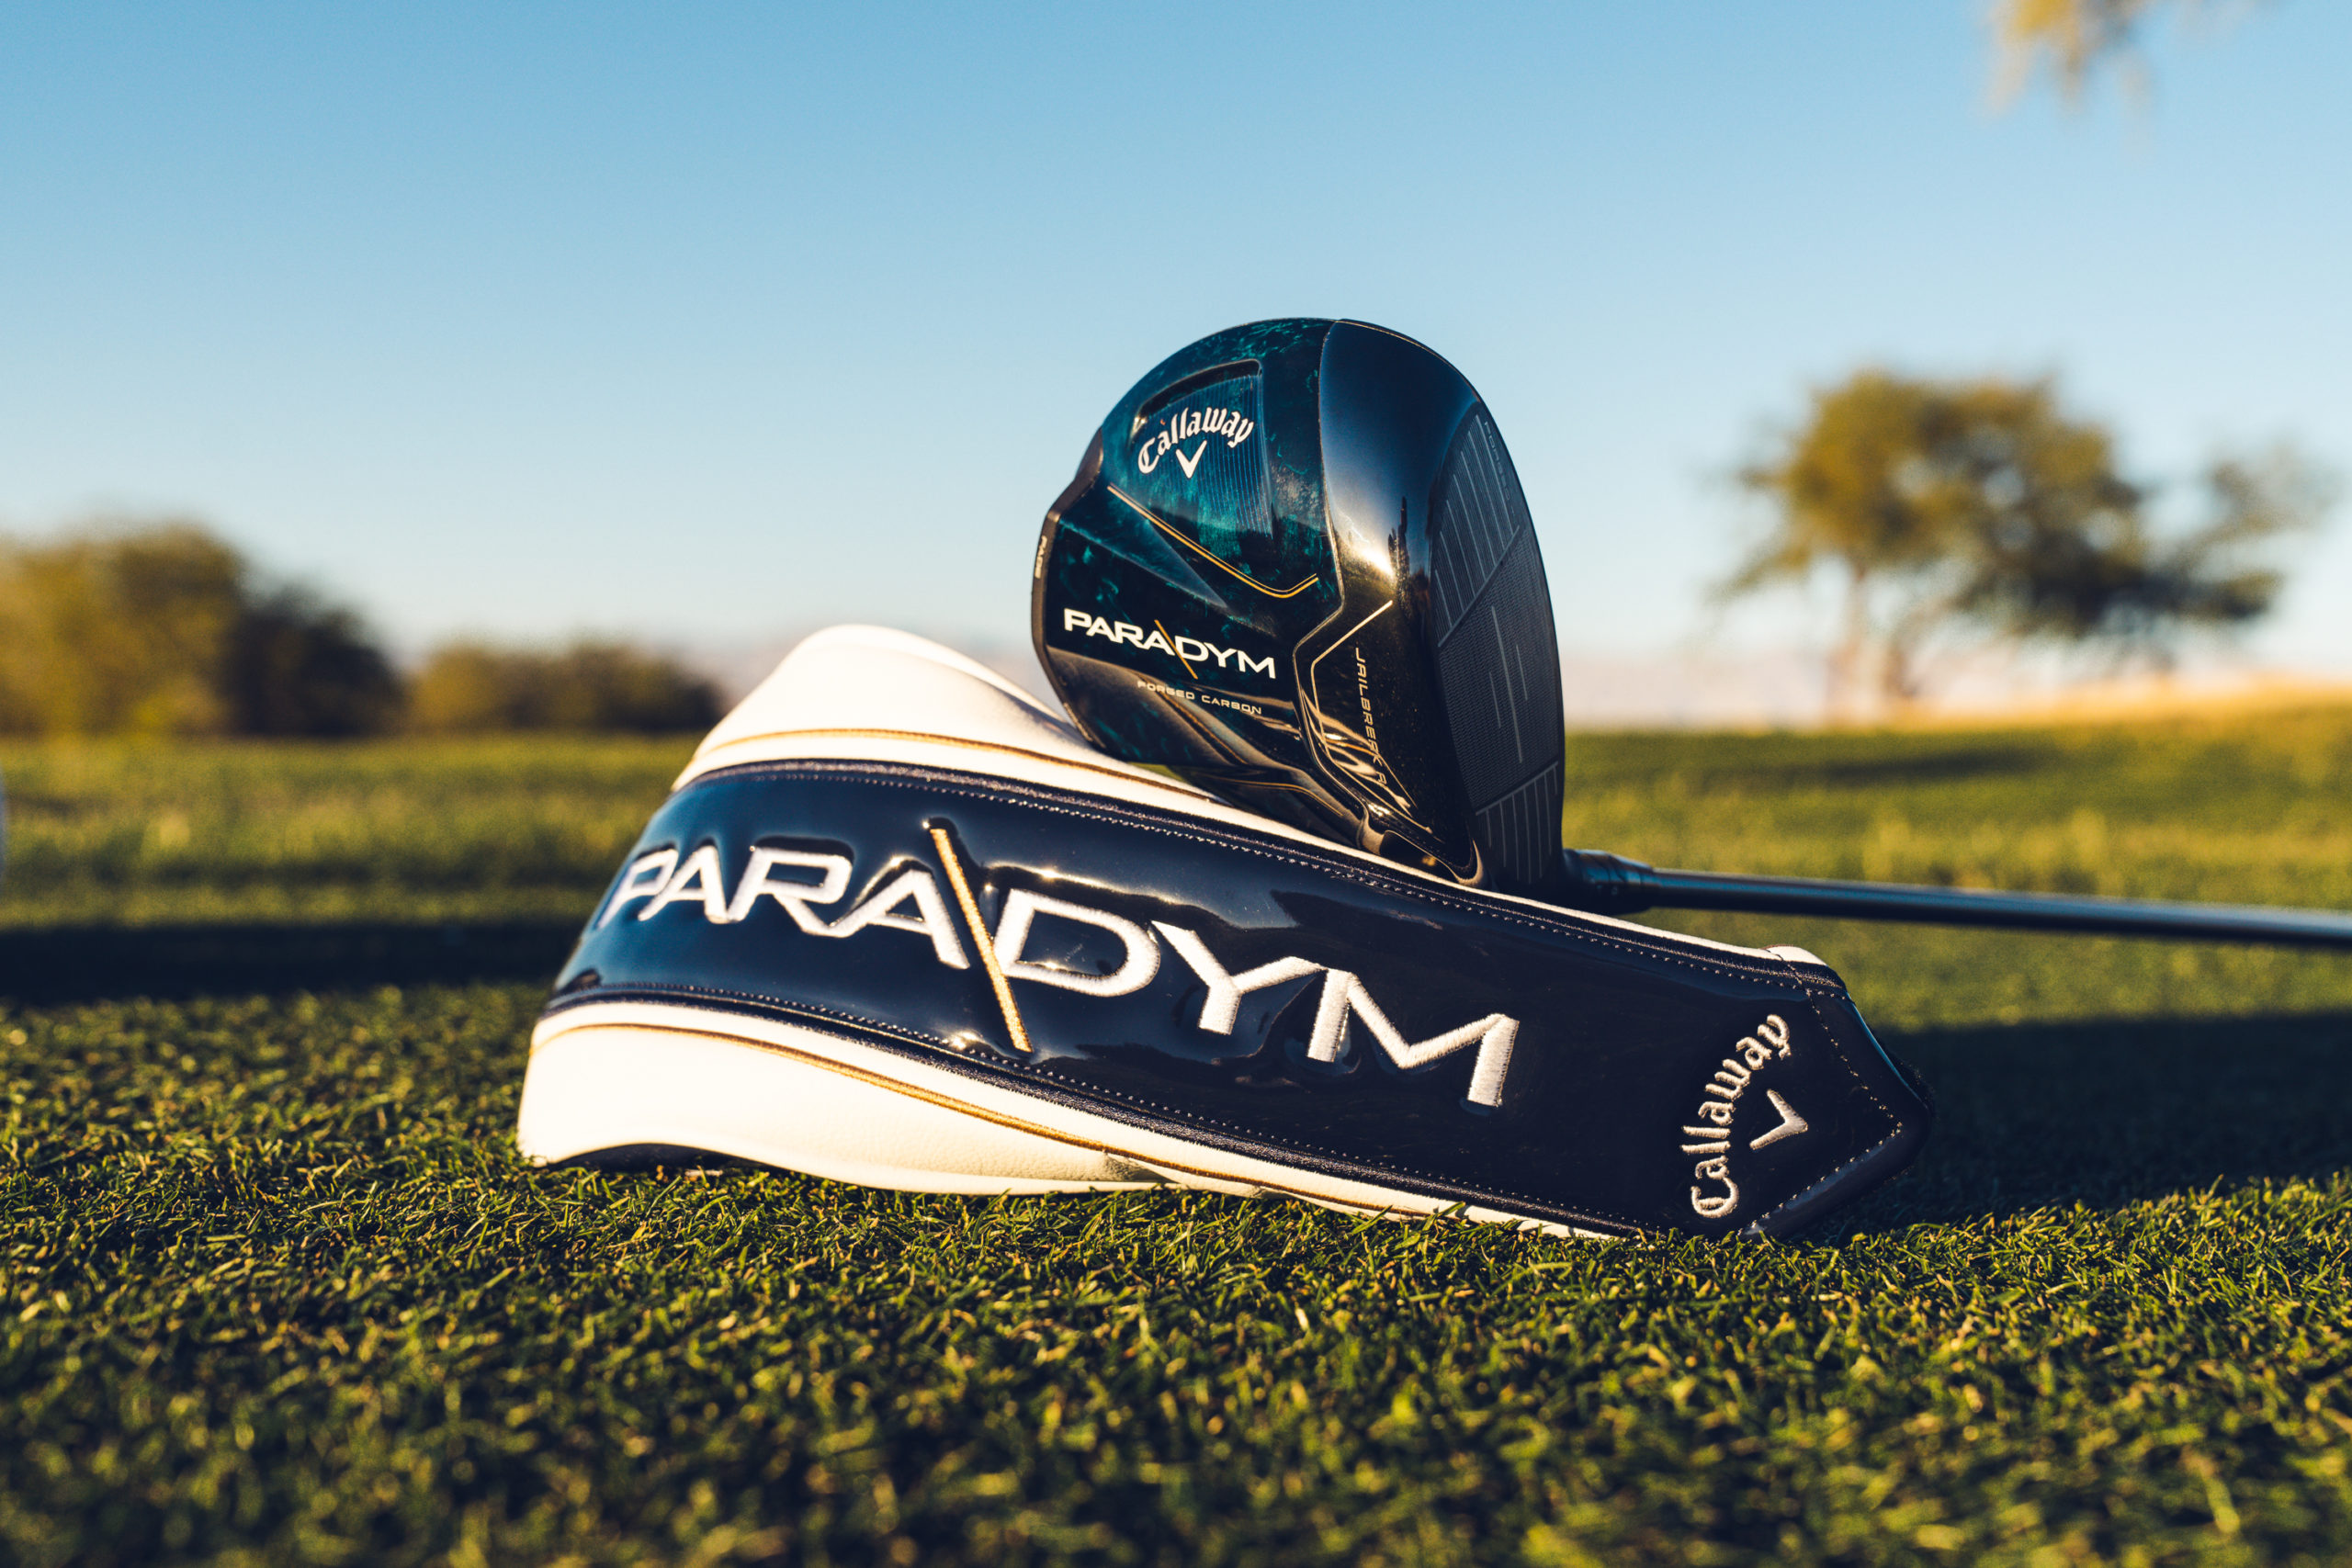 CALLAWAY GOLF ANNOUNCES NEW PARADYM FAMILY OF WOODS AND IRONS